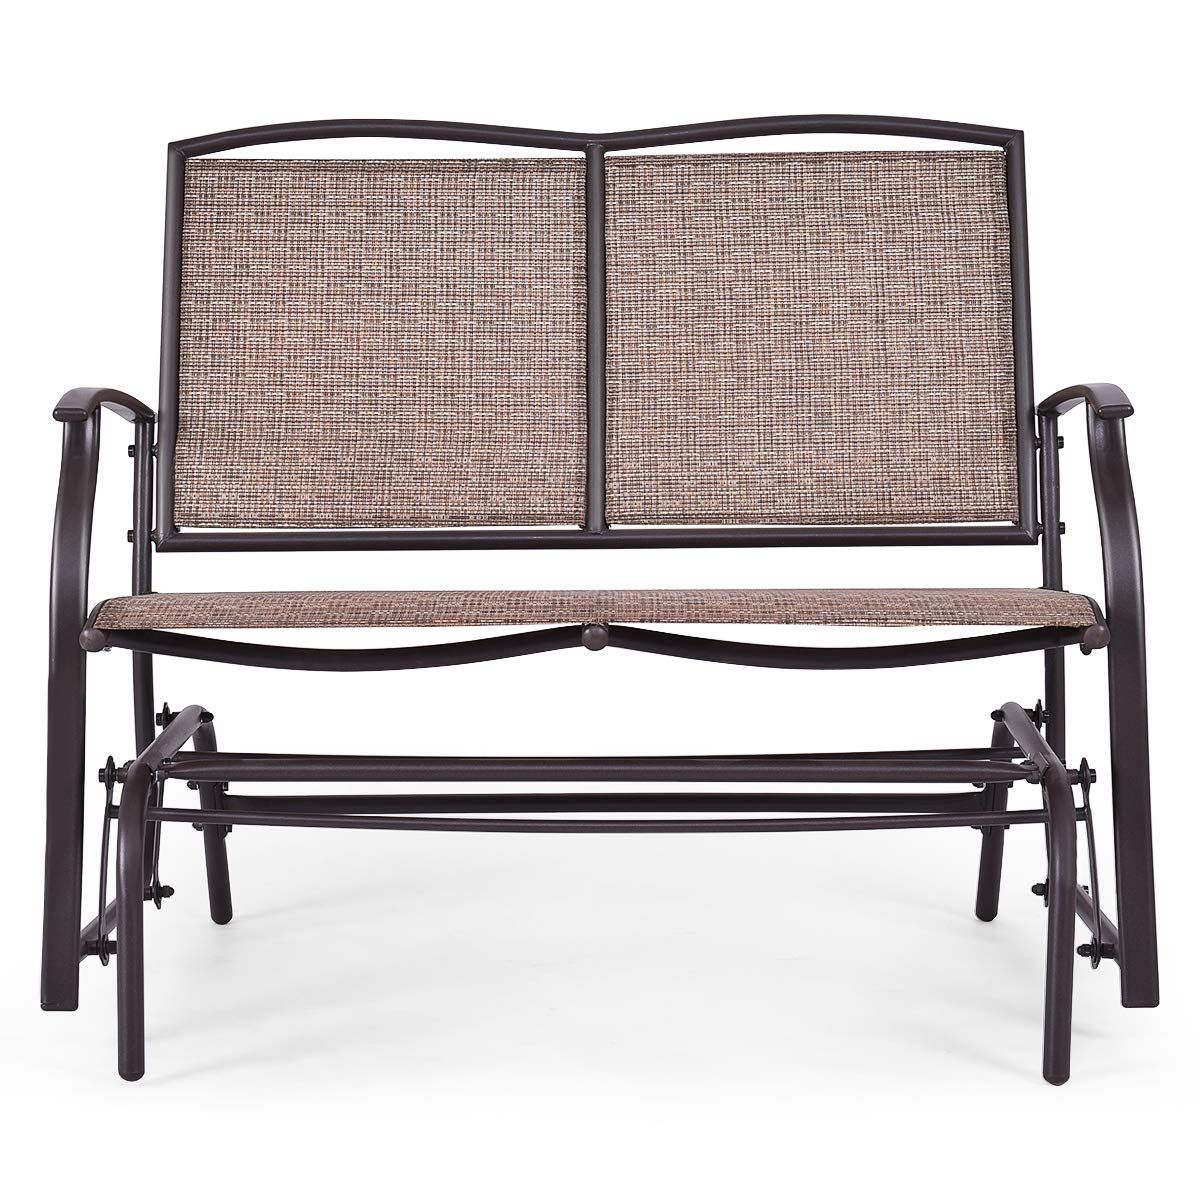 Popular Amazon : Wenst'skufan Patio Glider Chair, Outdoor With Regard To Outdoor Steel Patio Swing Glider Benches (View 12 of 30)